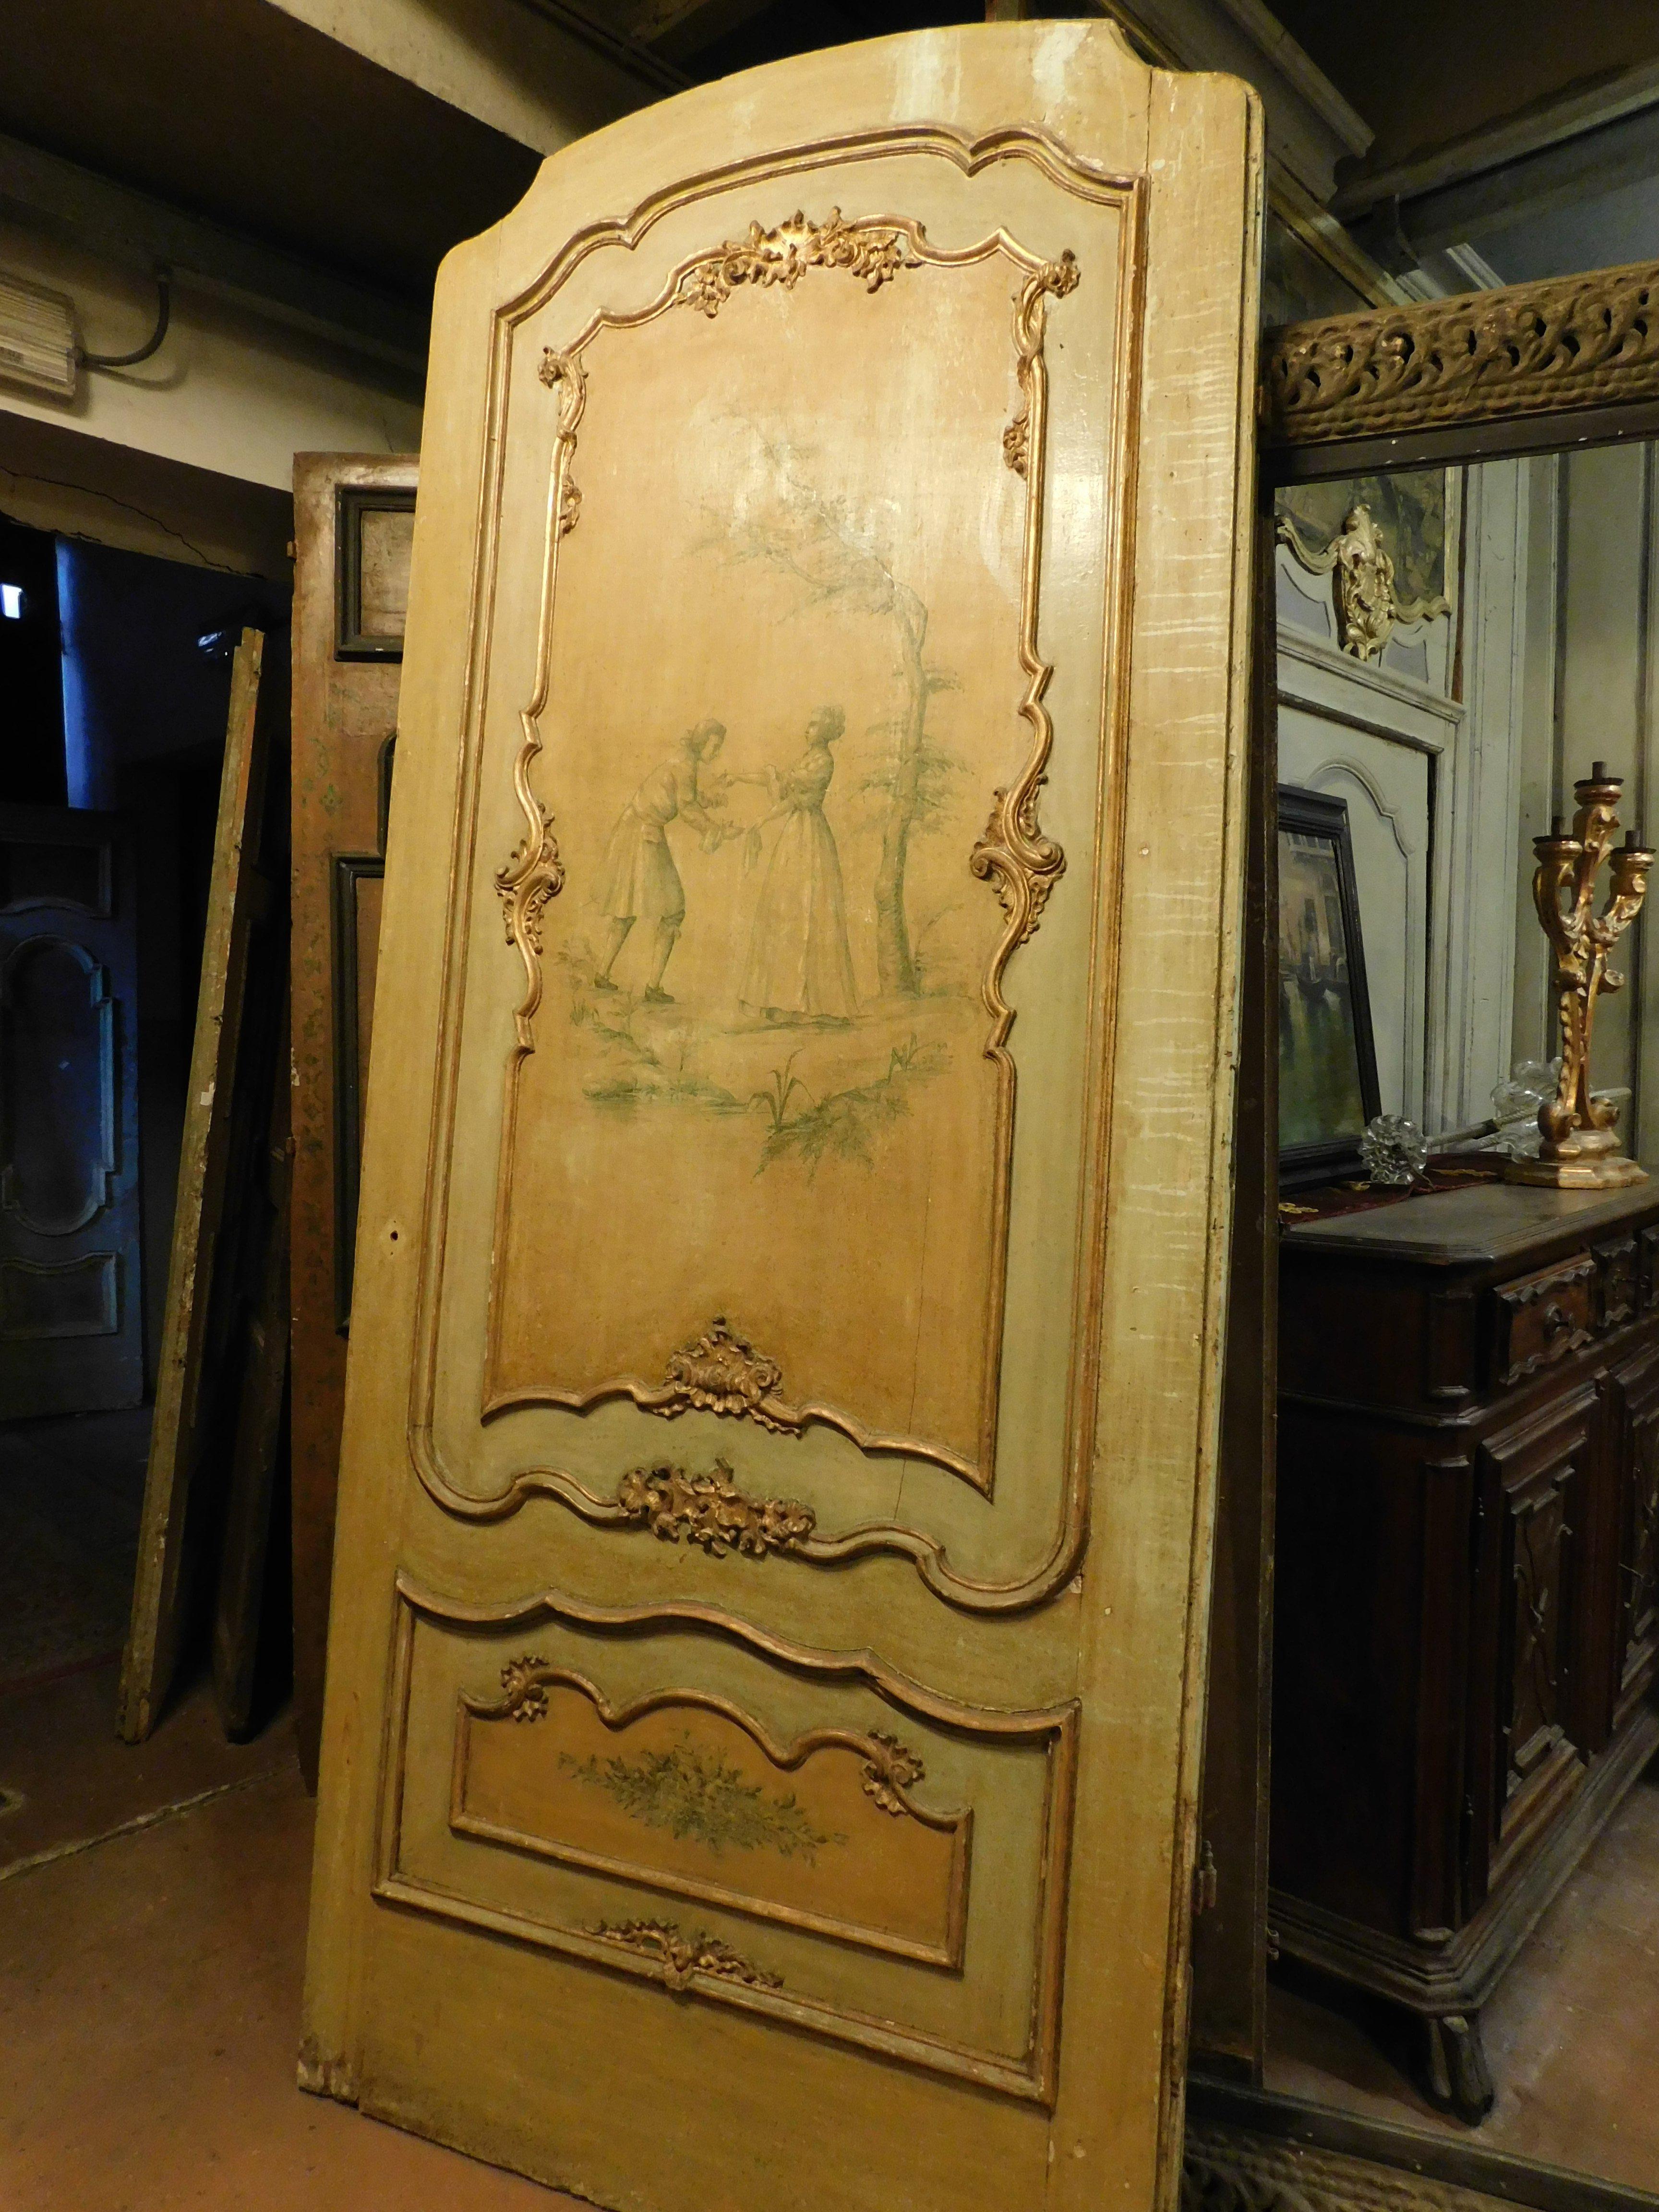 set of 9 antique interior doors, lacquered and hand-painted with different motifs, curved single-leaf doors, panels painted with floral decorations or cherubs and rich golden moldings, built in the 18th century for an important villa of a well-known